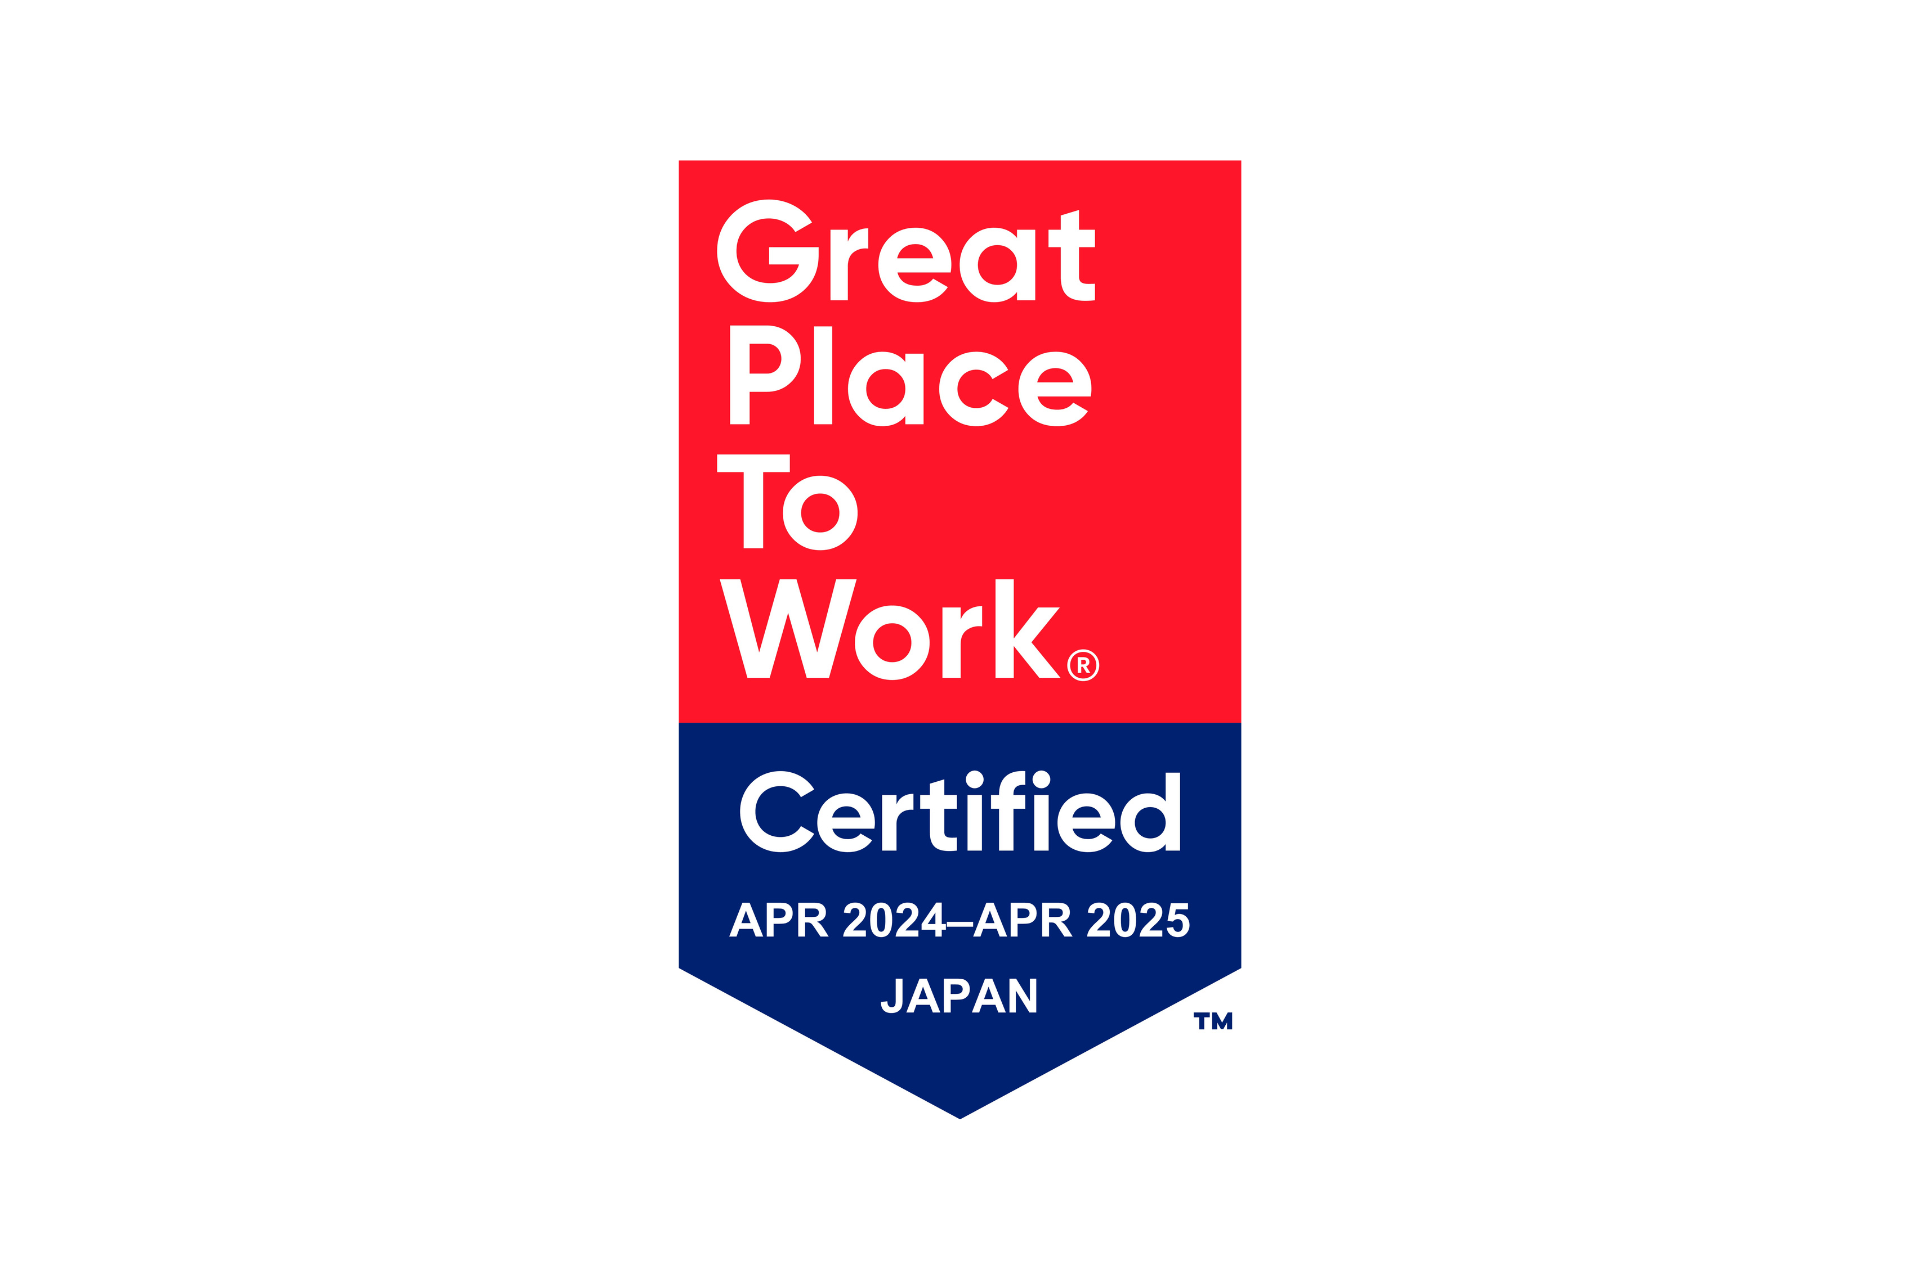 AogAGreat Place to Work(R) Institute JapańûЁvɔF